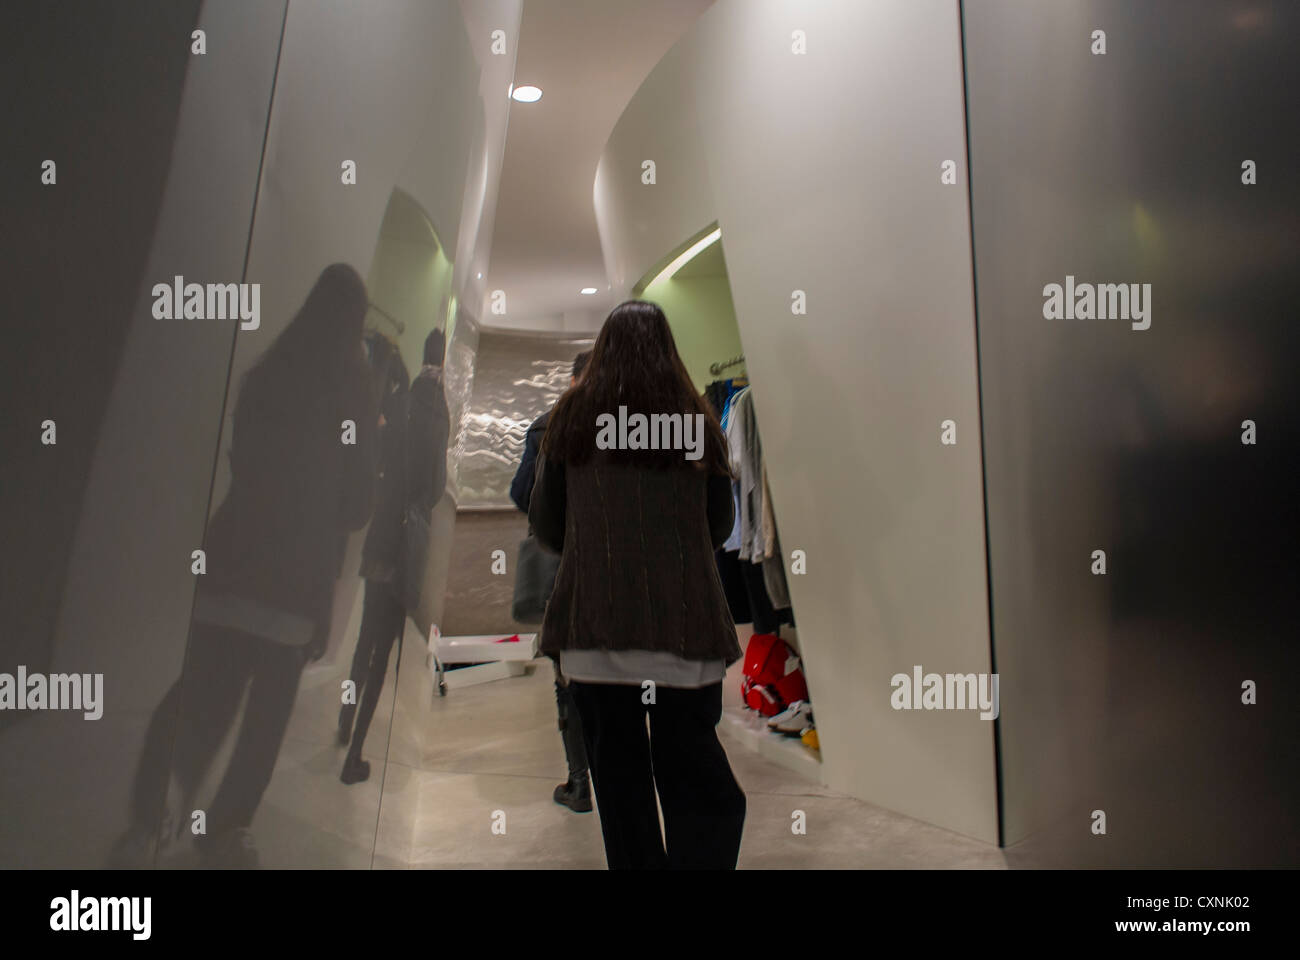 New York, NY, USA, Woman from behind, Shopping in Luxury SHops, 'Comme des Garcons', in Chelsea Area Stock Photo